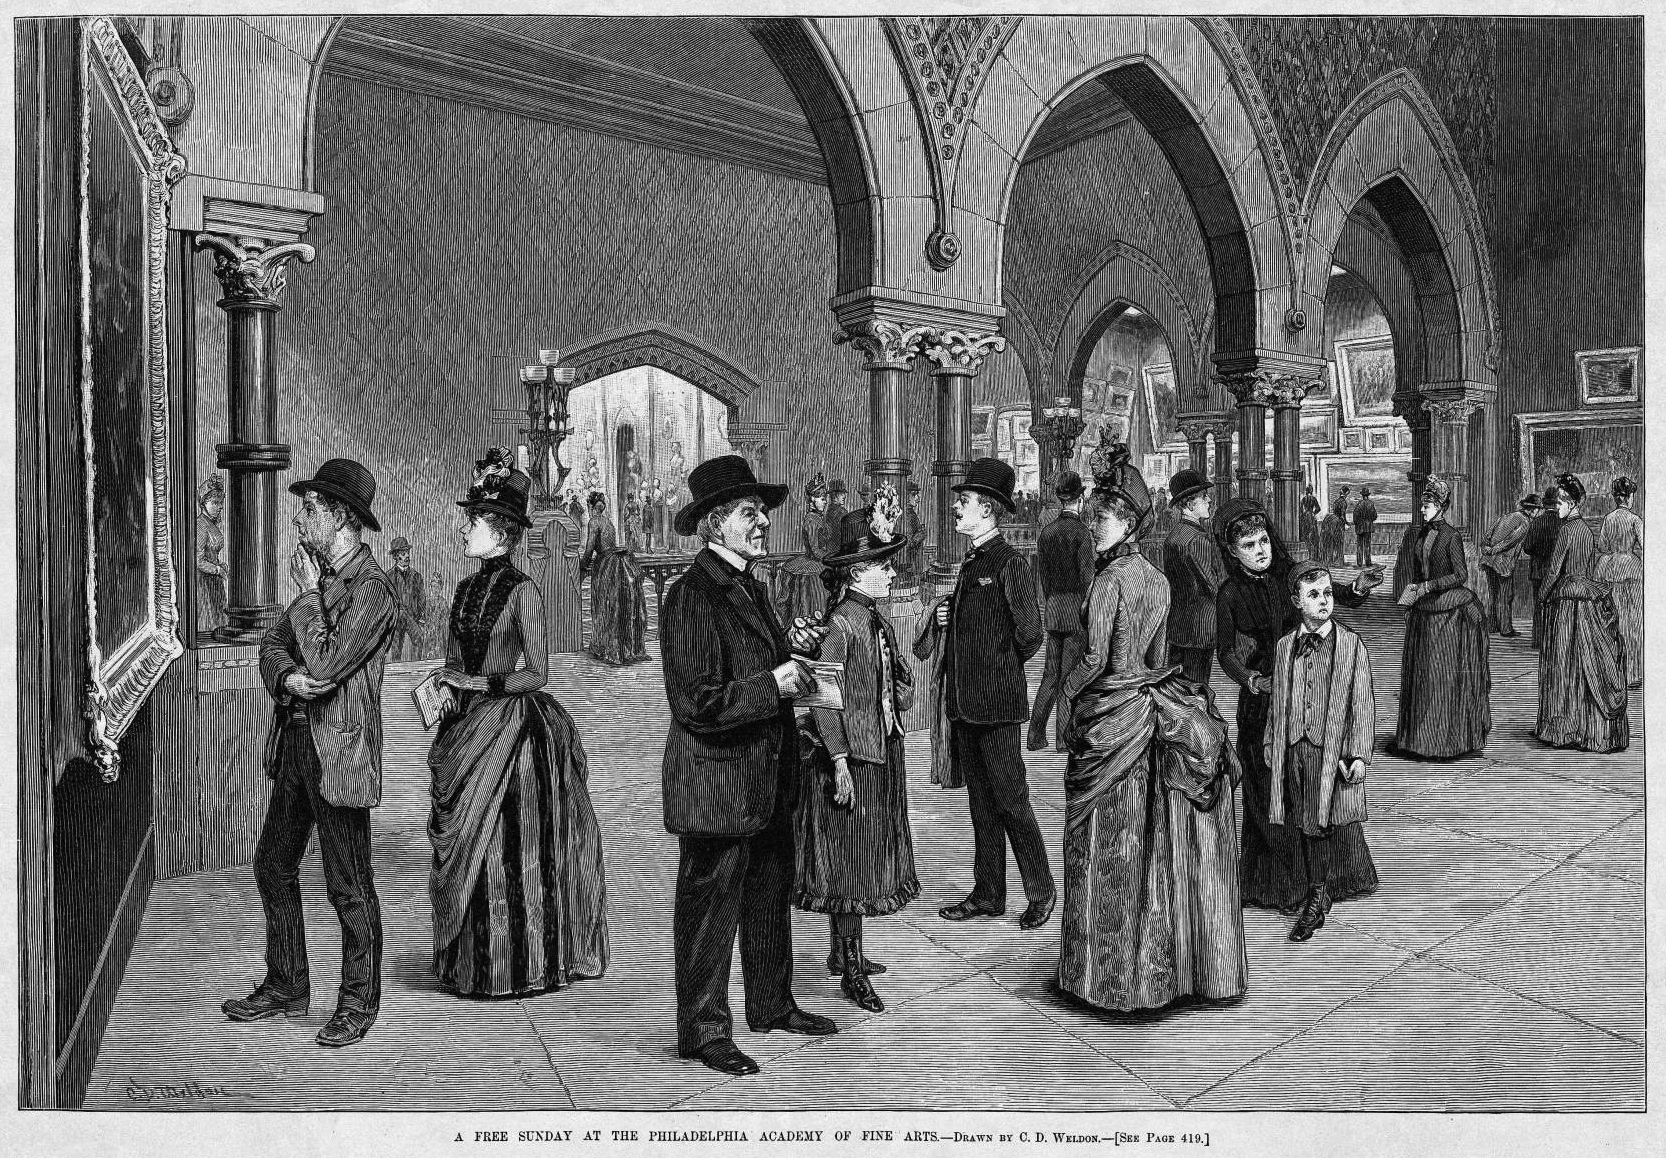 C. D. Weldon, A Free Sunday at the Philadelphia Academy of Fine Arts, Wood engraving published in Harper's Weekly, June 11, 1887